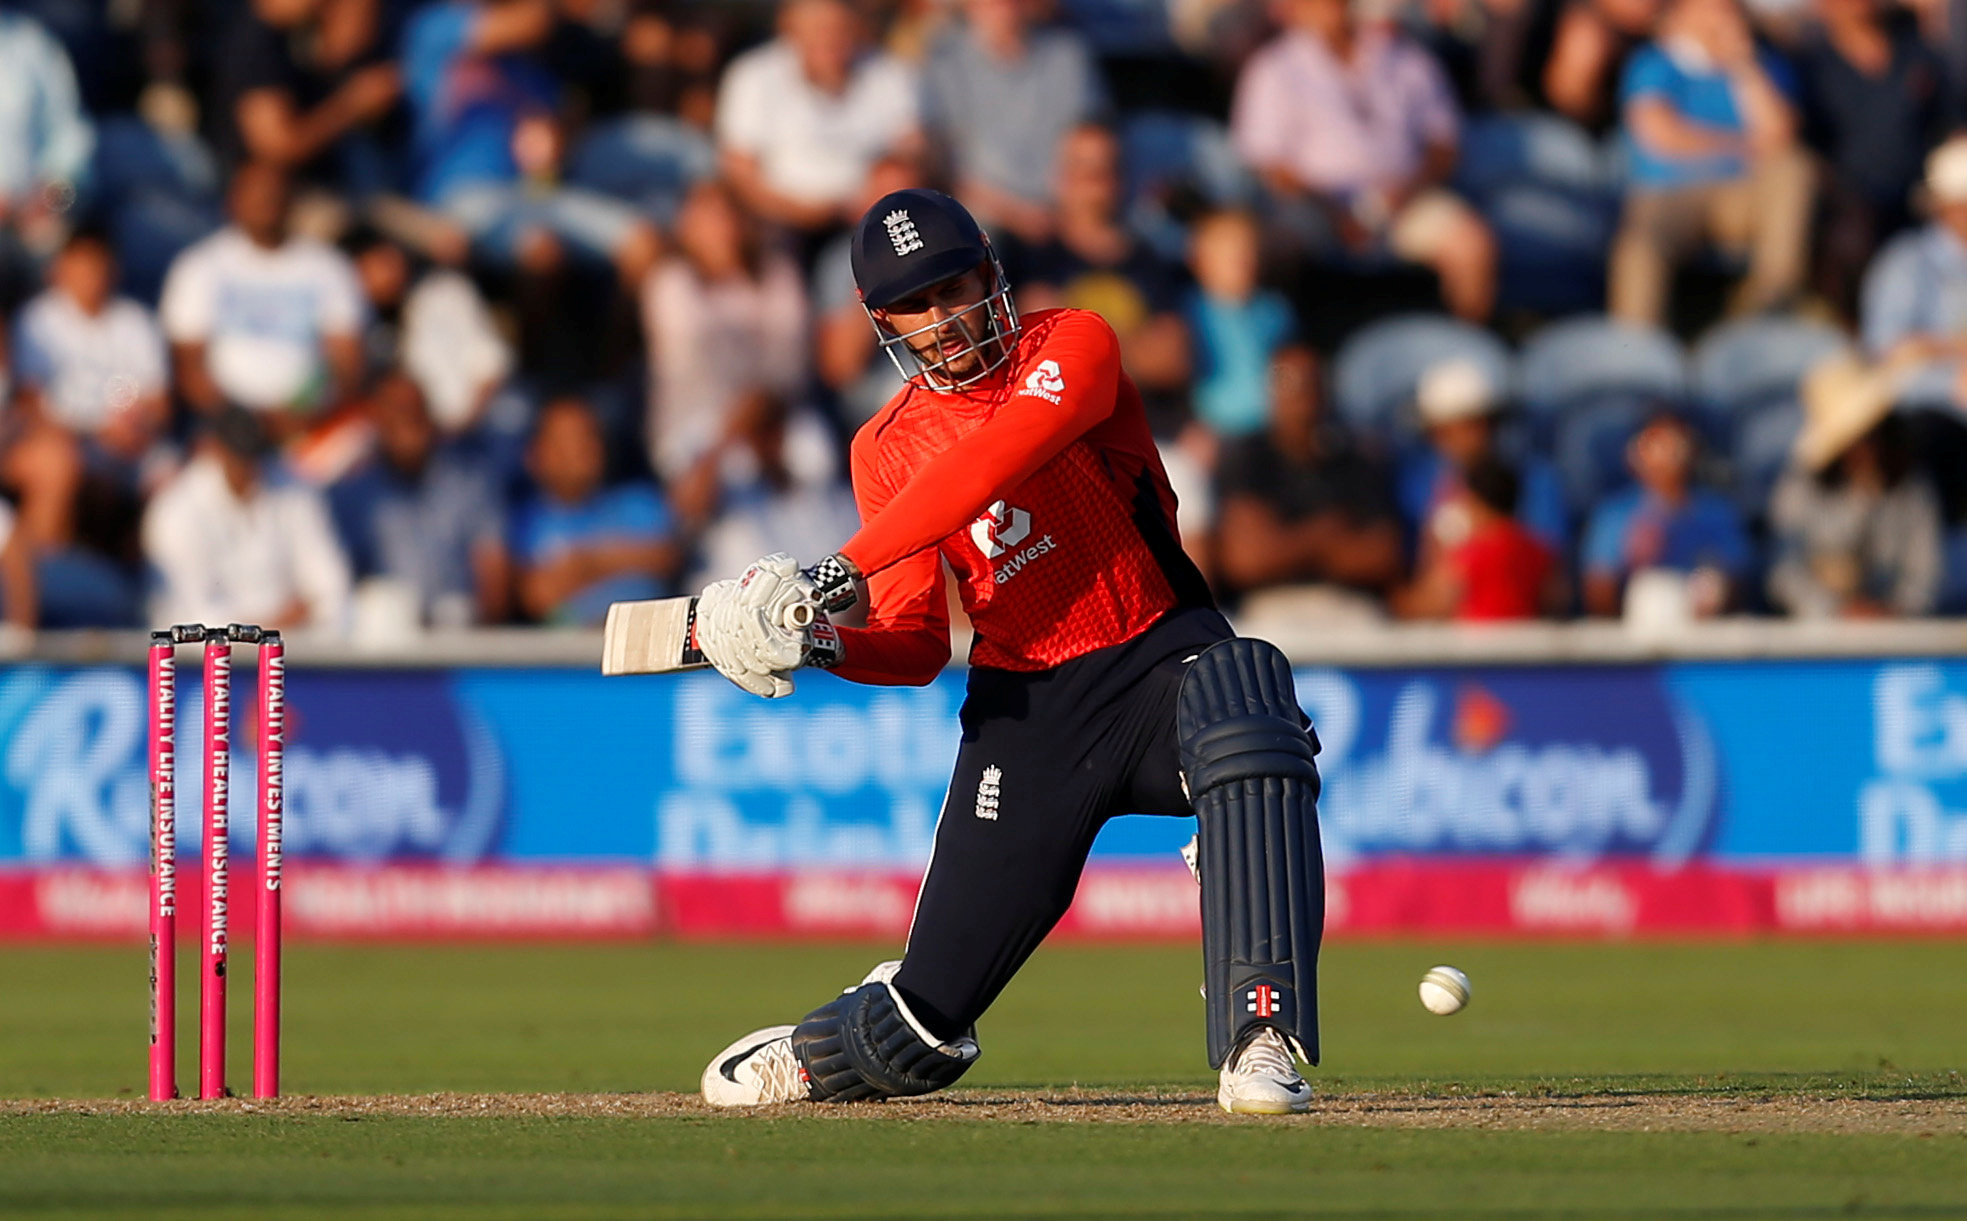 Cricket: Hales leads England to dramatic win over India